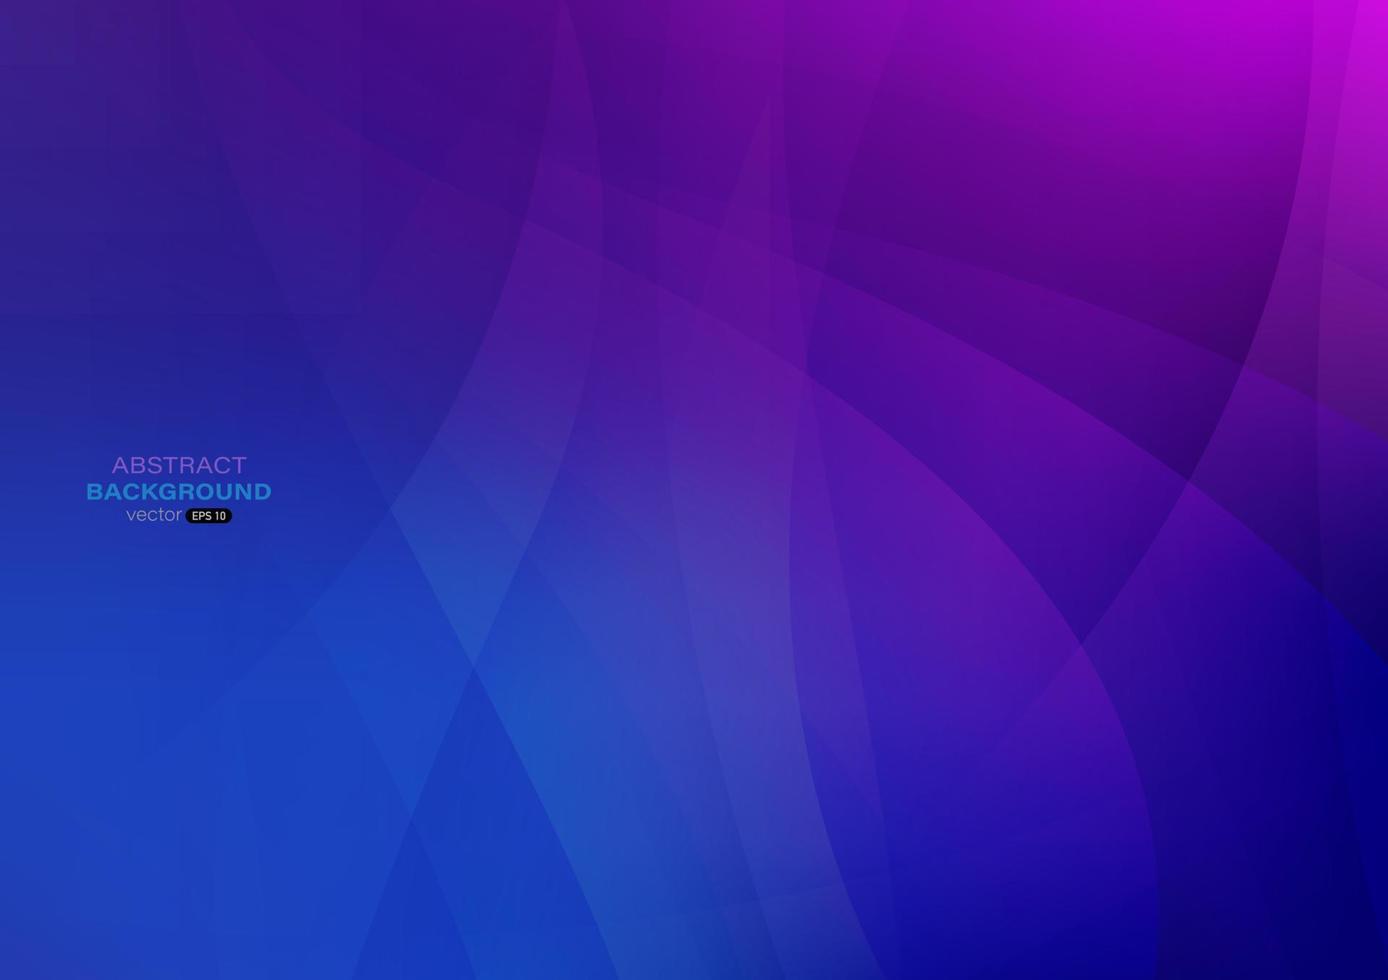 Abstract background with blue and purple gradient smooth curve light lines vector illustration